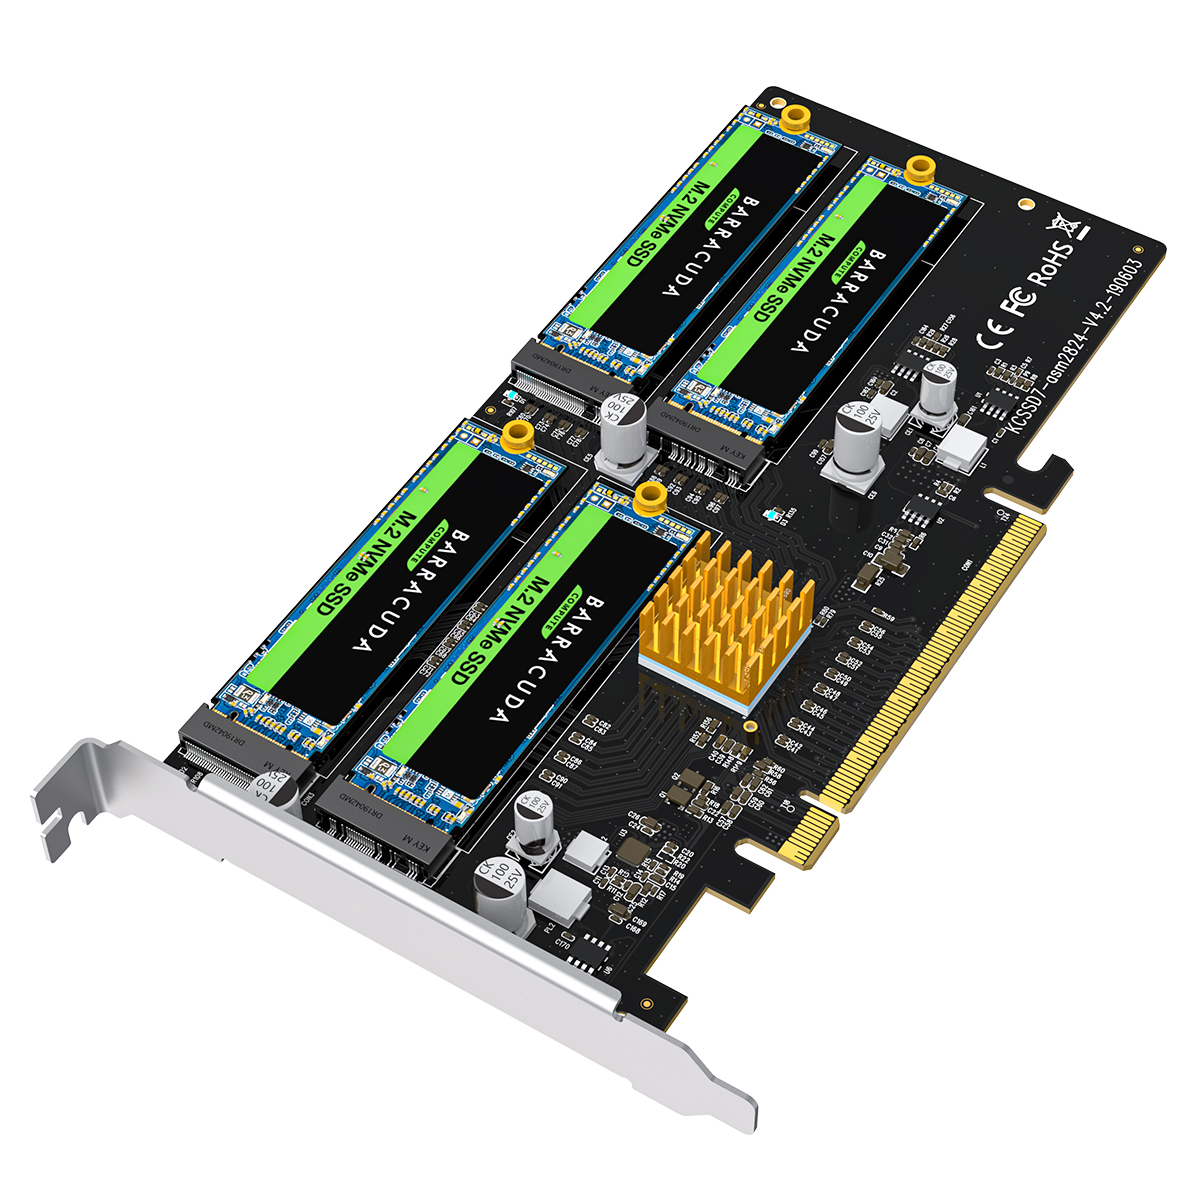 MAIWO NVMe M.2 PCIex16 card ,4 Bay M.2 NVMe SSD to PCIe x16 Adapter Card for PC computer, support M 